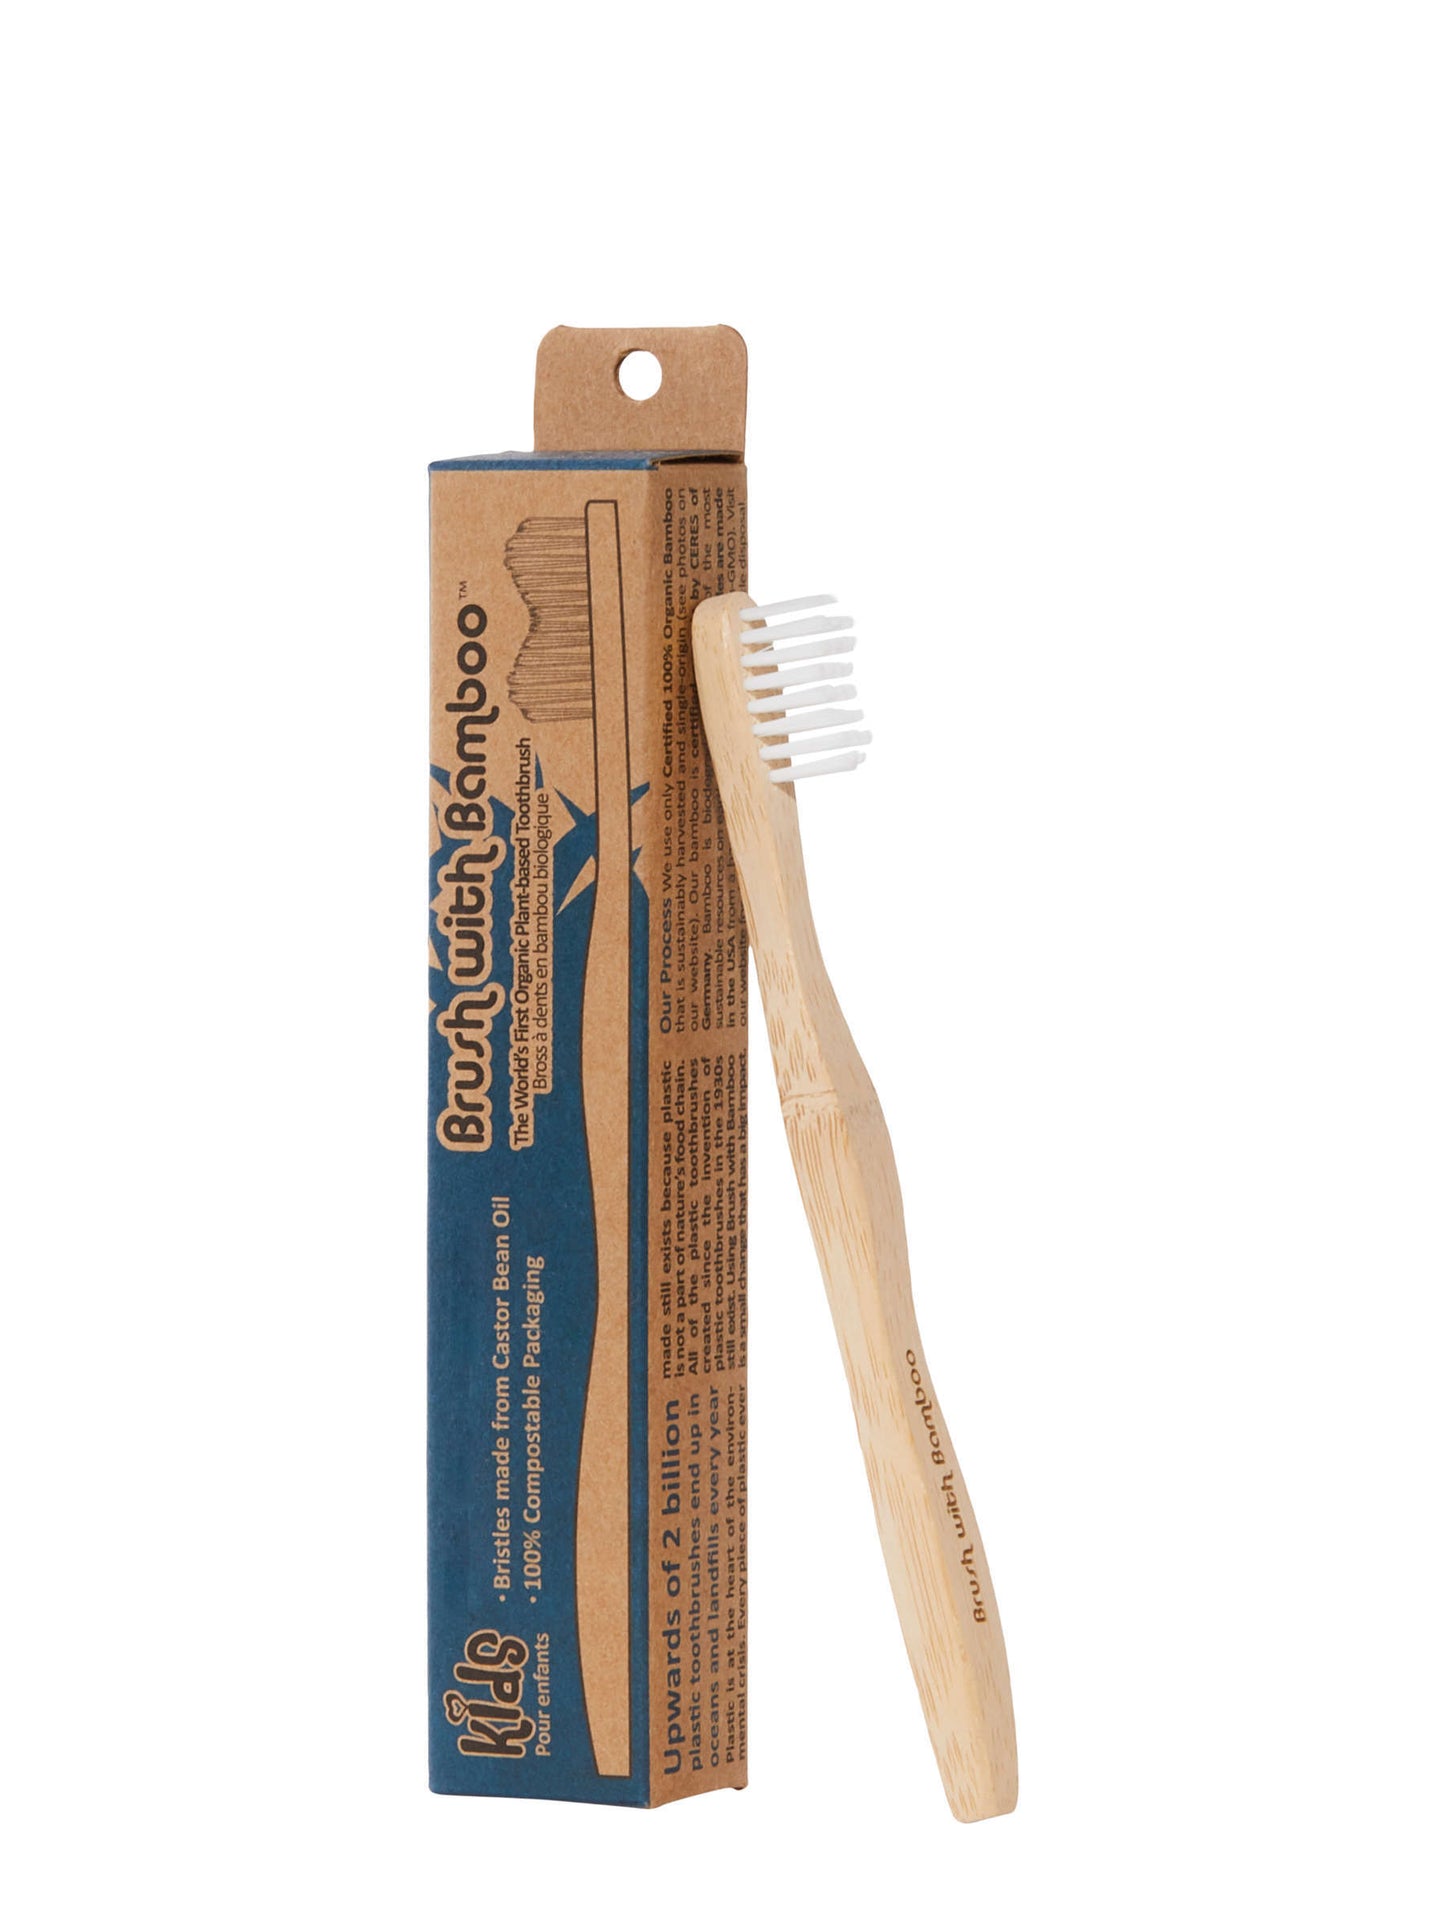 Kids Toothbrush with Bamboo